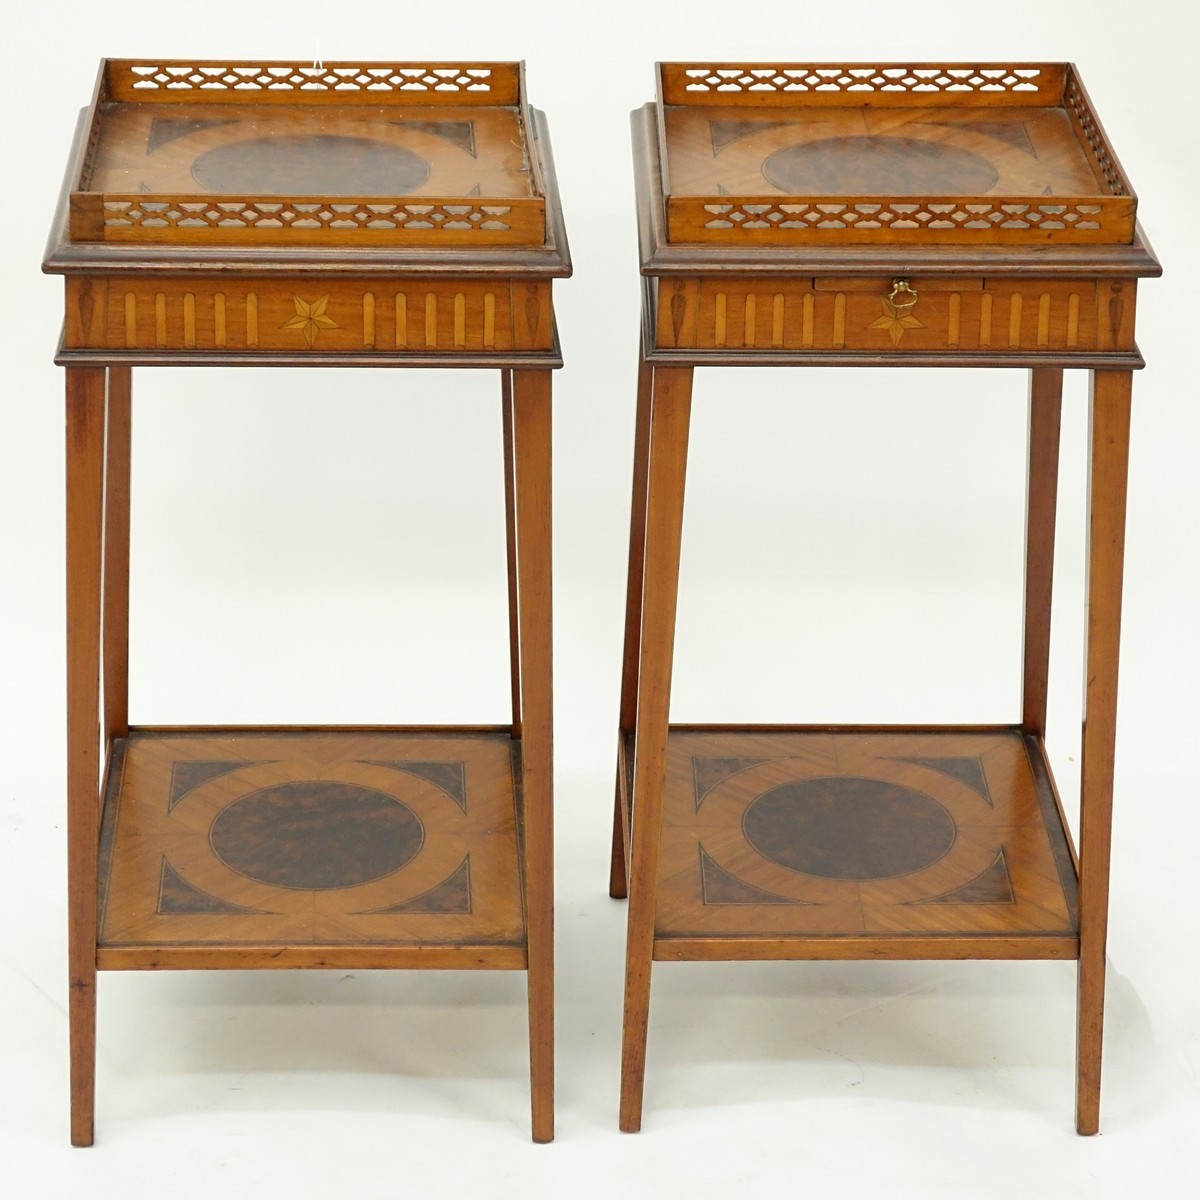 Pair of Edwardian Burled Inlaid Two Tiered Pedestal Tables with Gallery to Top. Sliding platform to top.